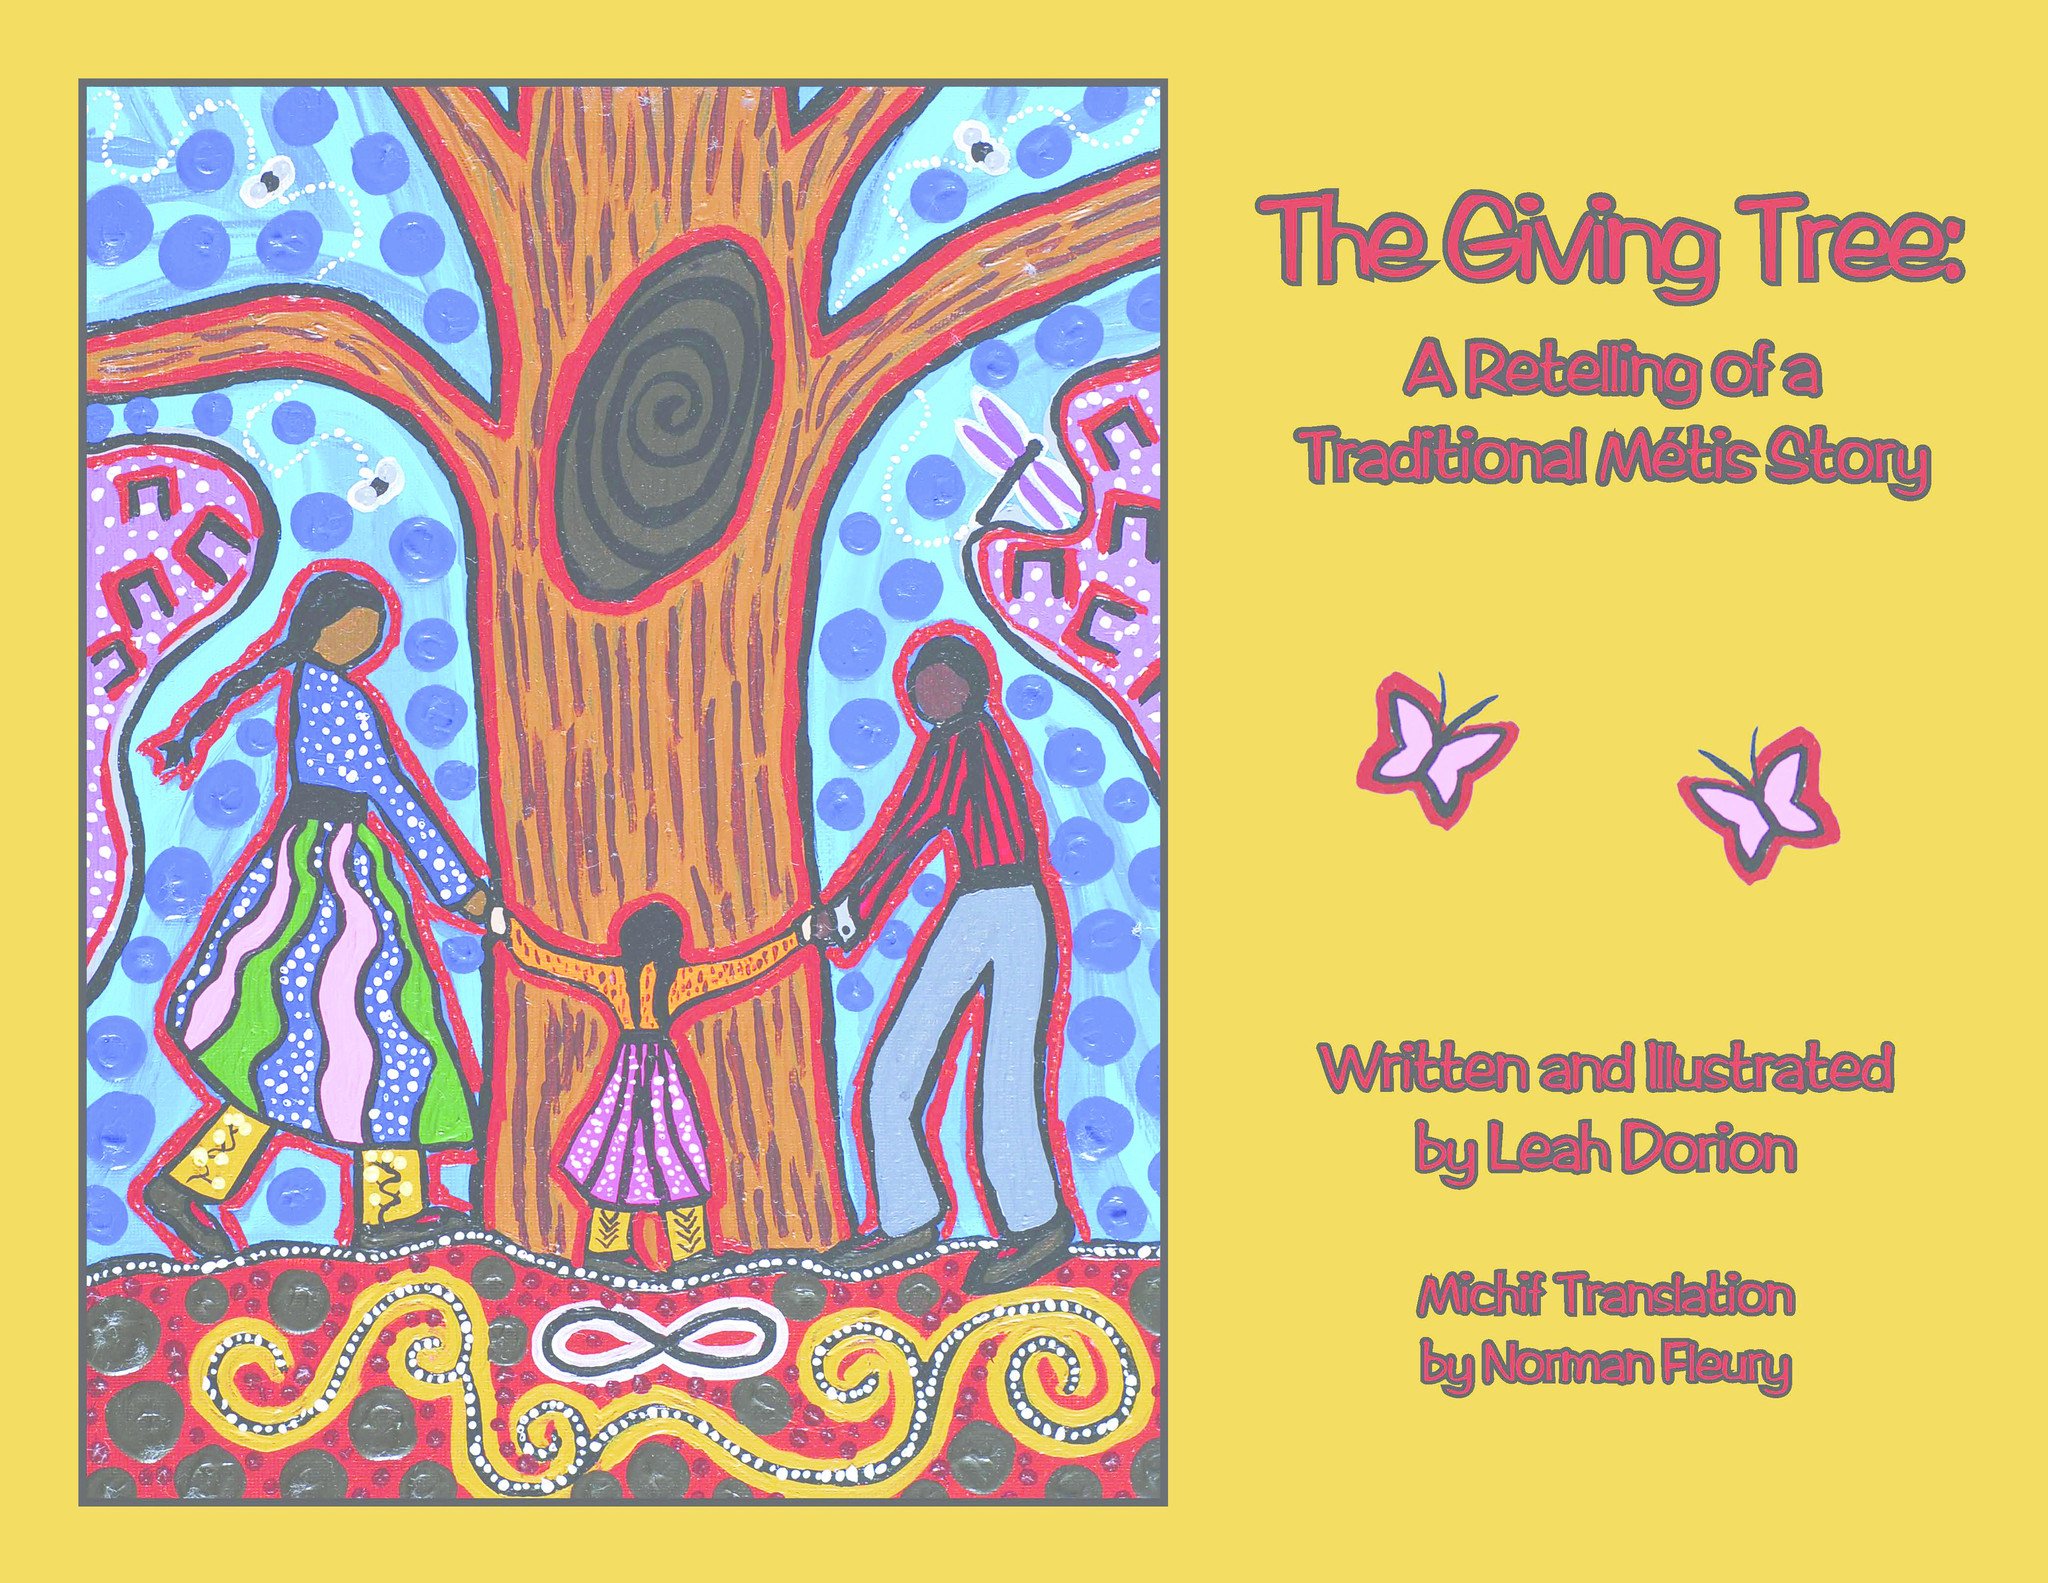 The Giving Tree: A Retelling of a Traditional Metis Story